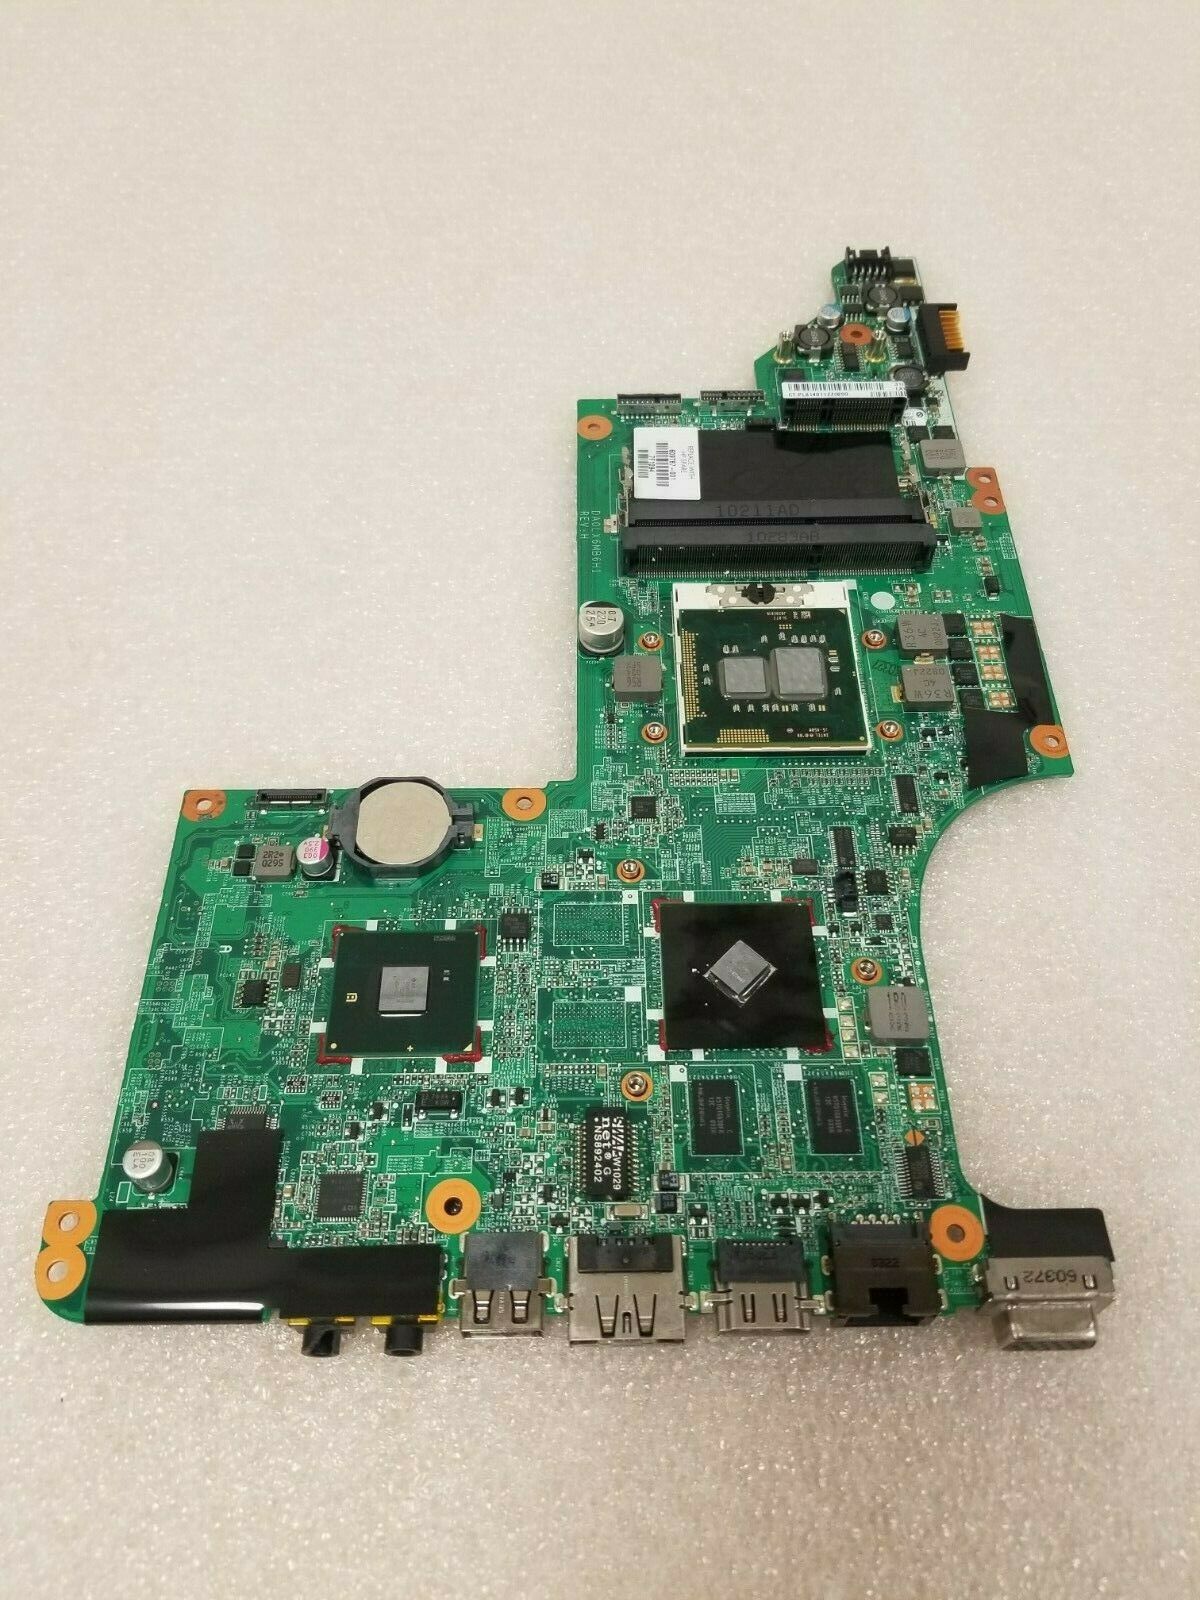 609787-001 for HP DV7-4000 motherboard S/N CNF0381HHF Compatible CPU Brand: For HP Memory Type: DDR3 SDRAM